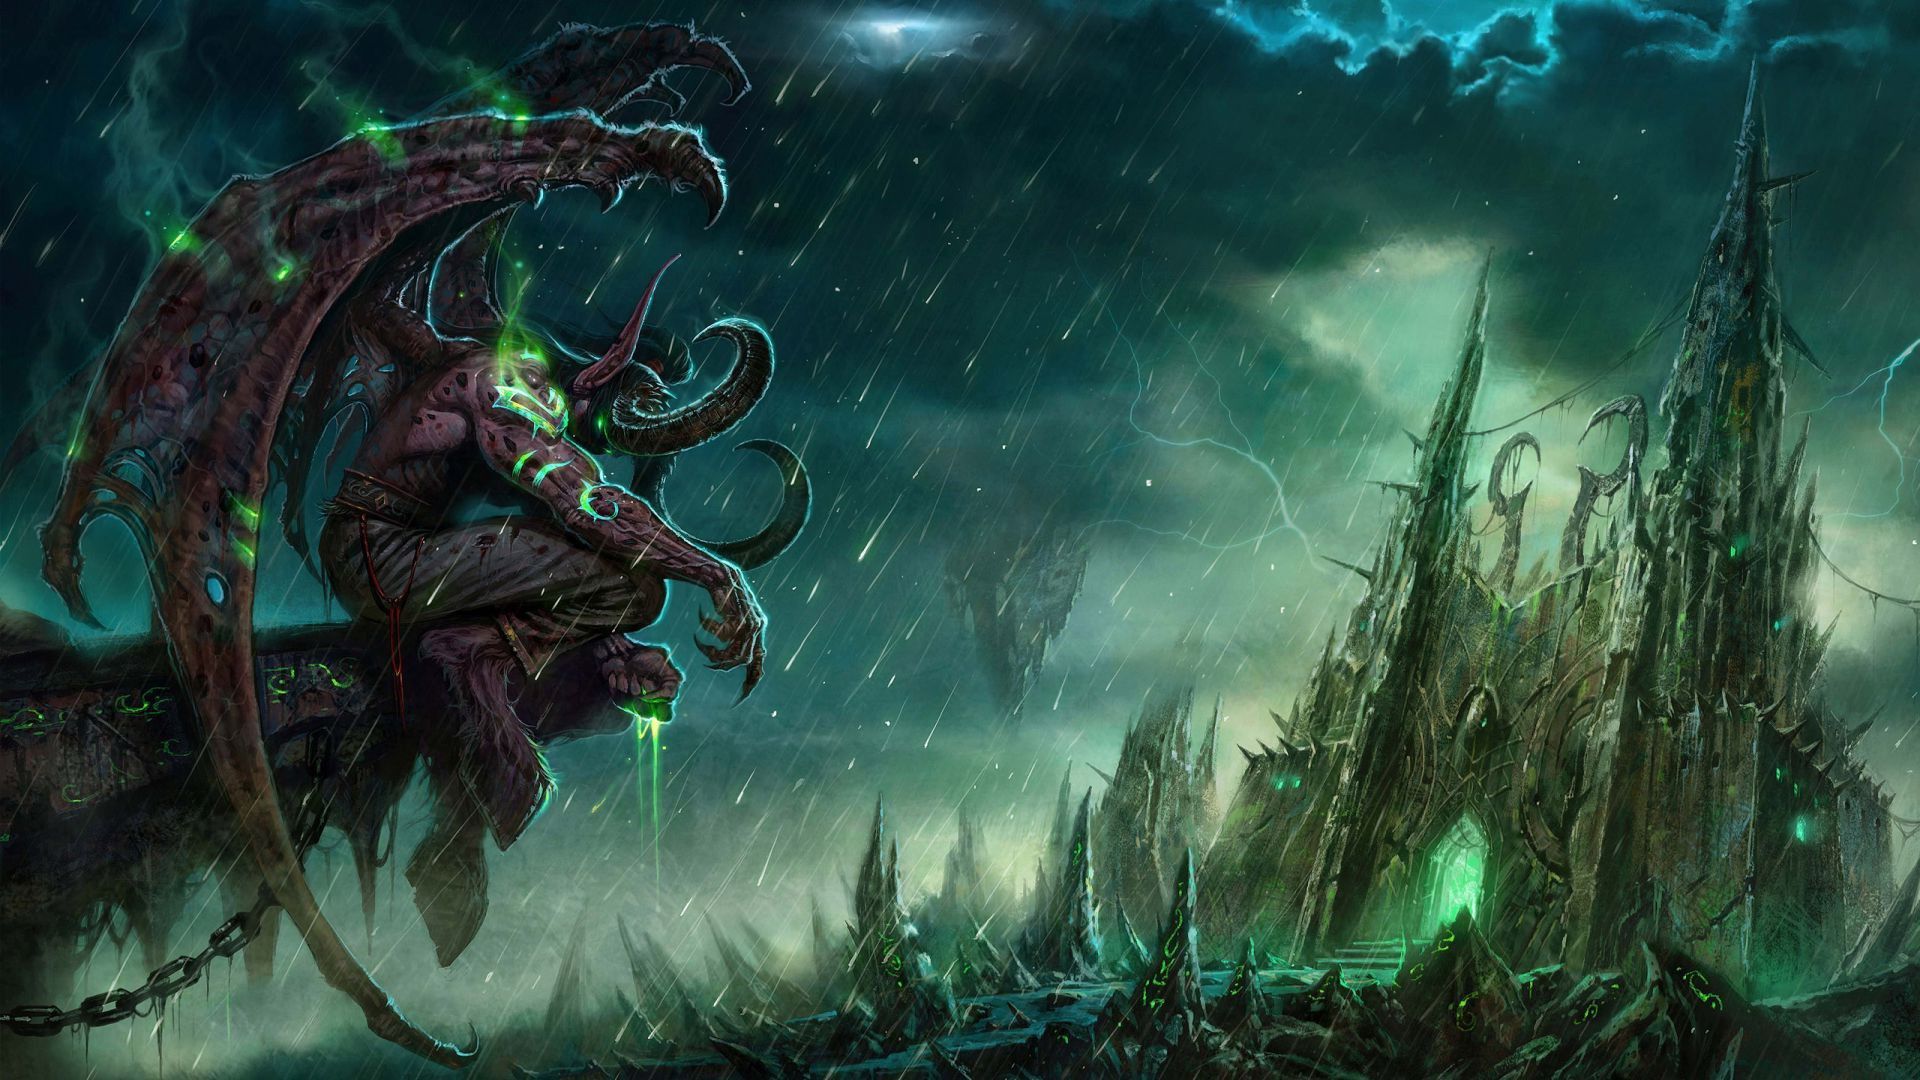 World of Warcraft Wallpapers Best Backgrounds